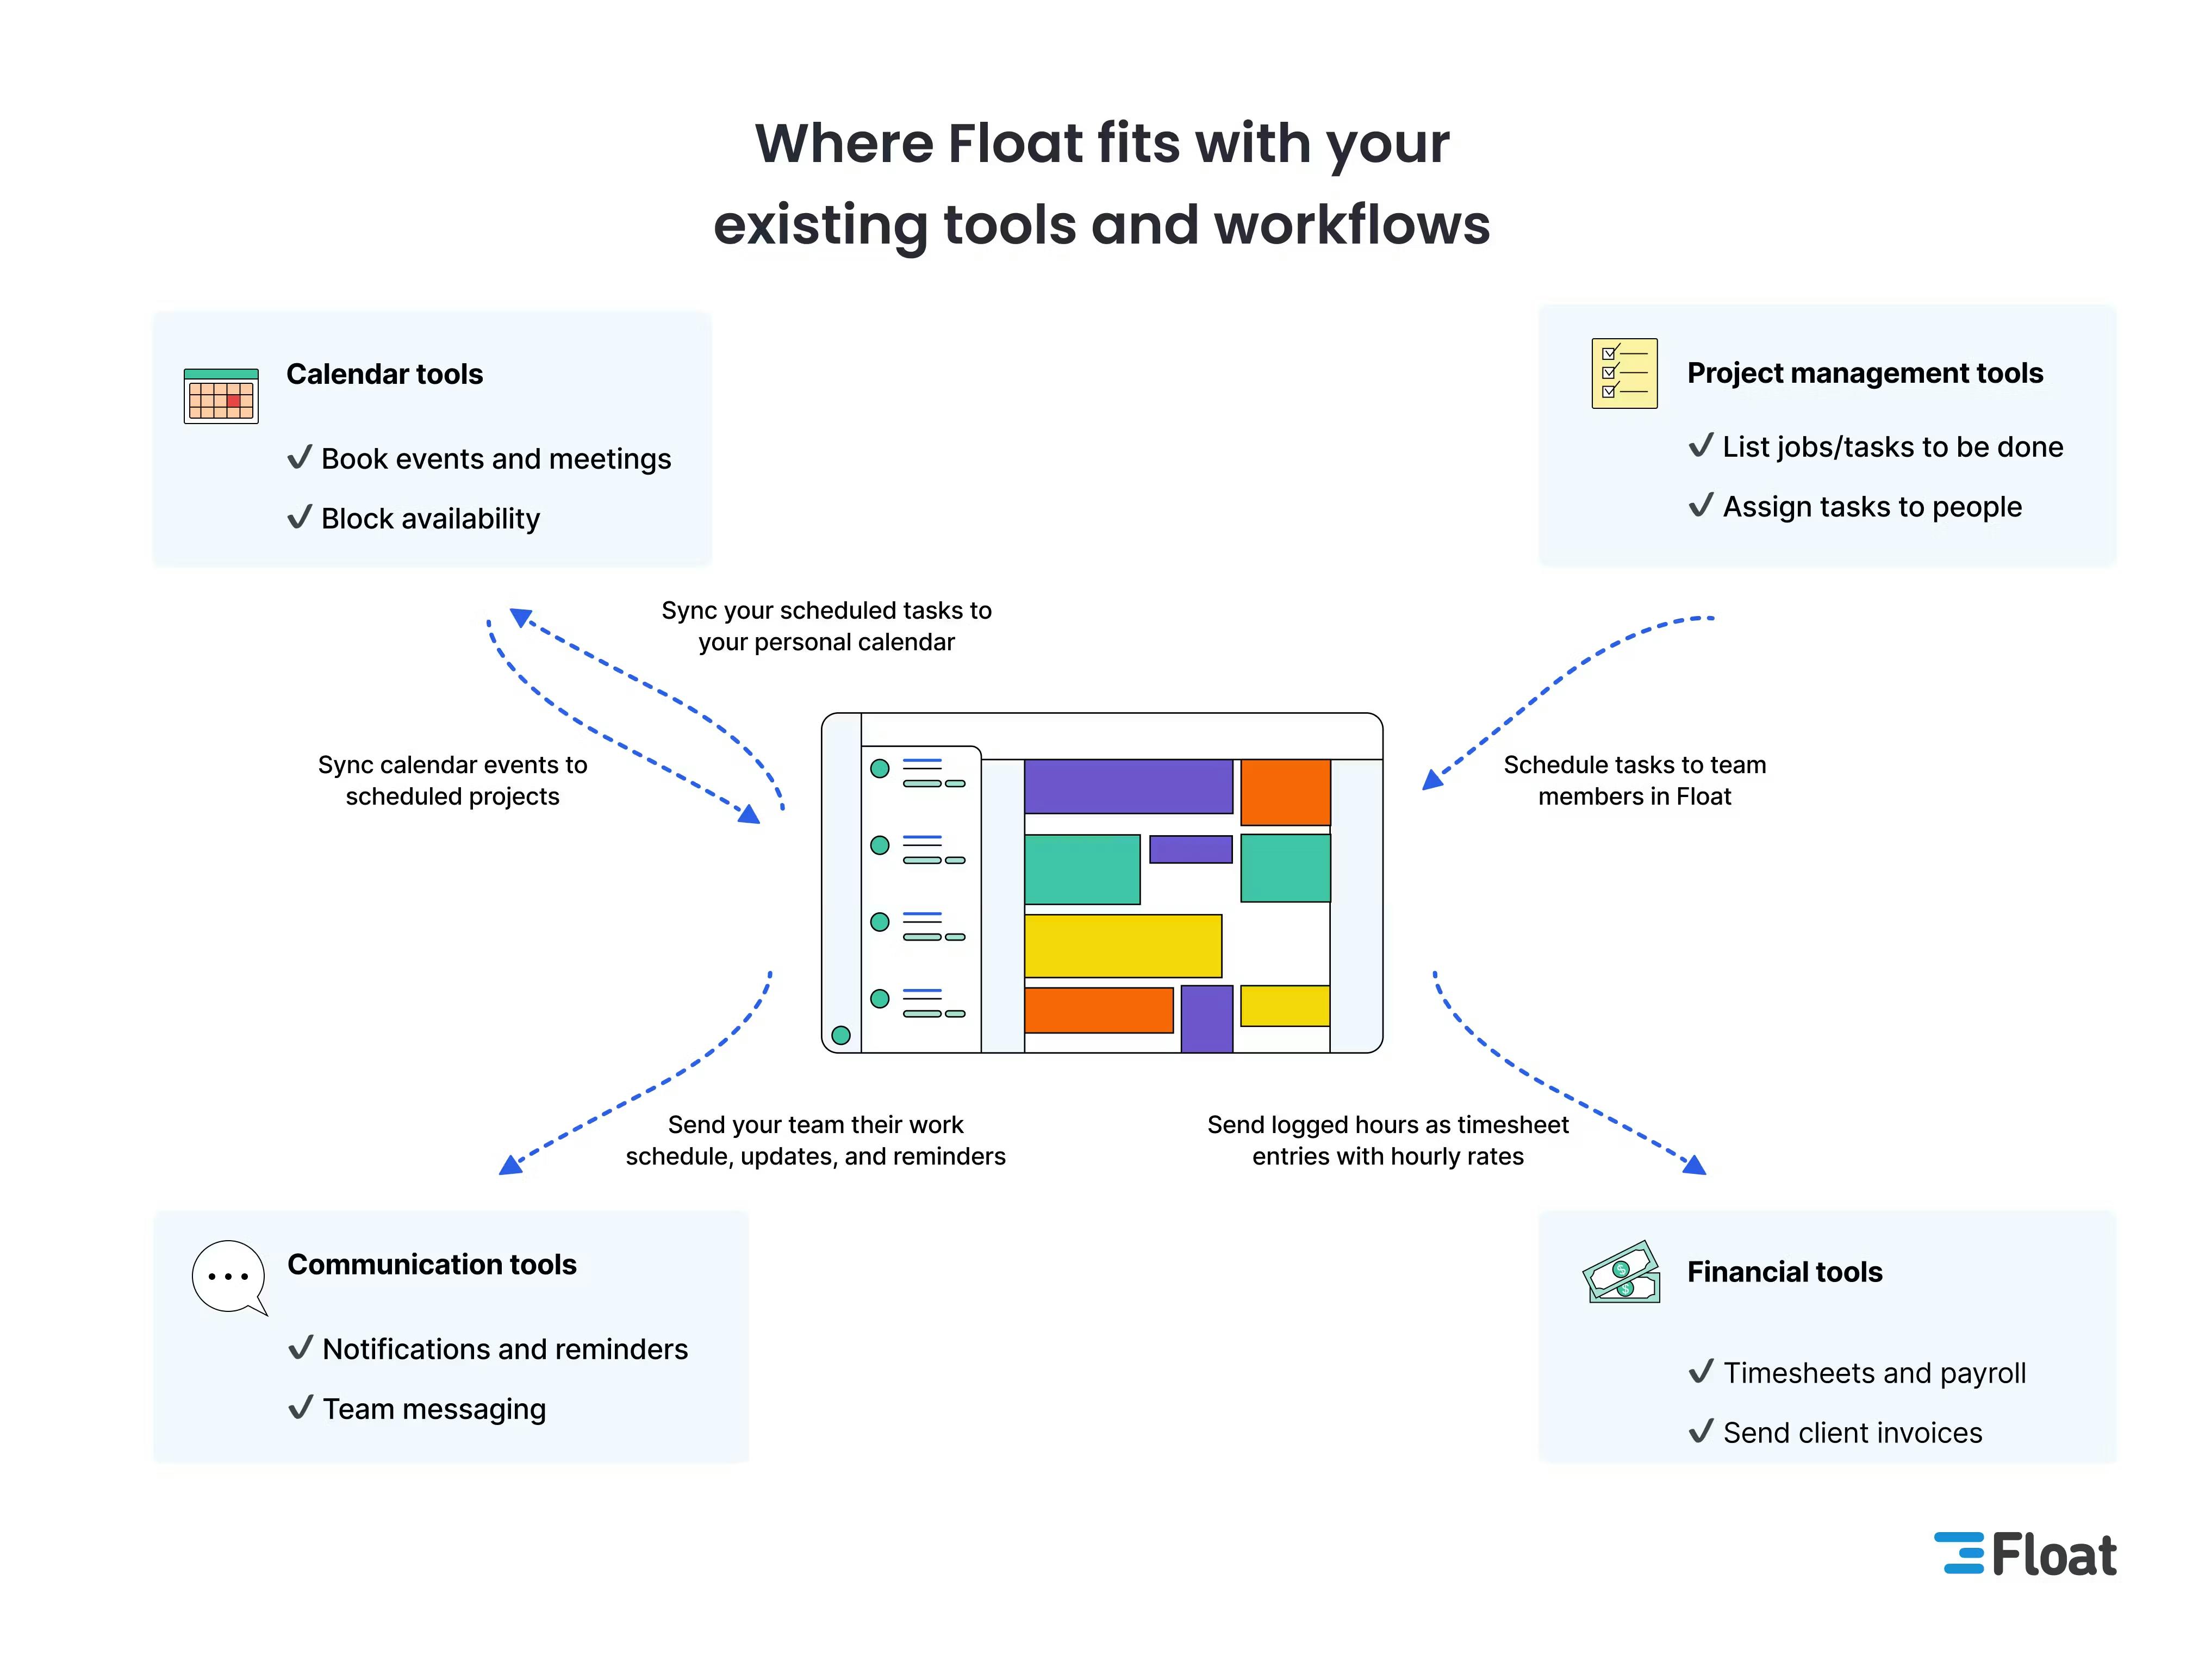 Where Float fits in your existing tools and workflows 